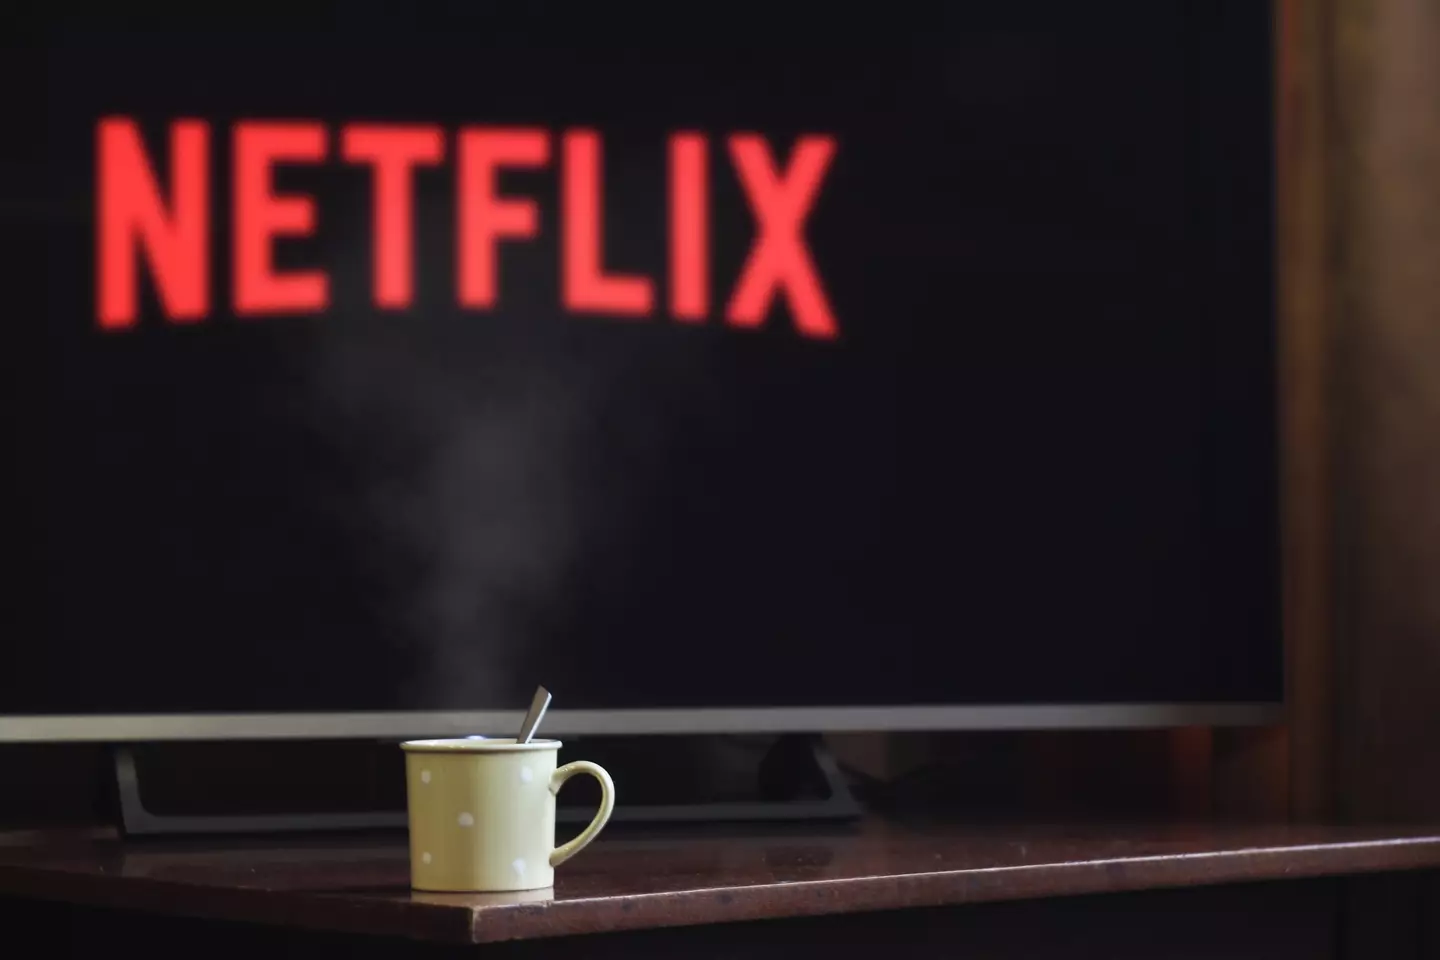 Did you know about this Netflix hack?